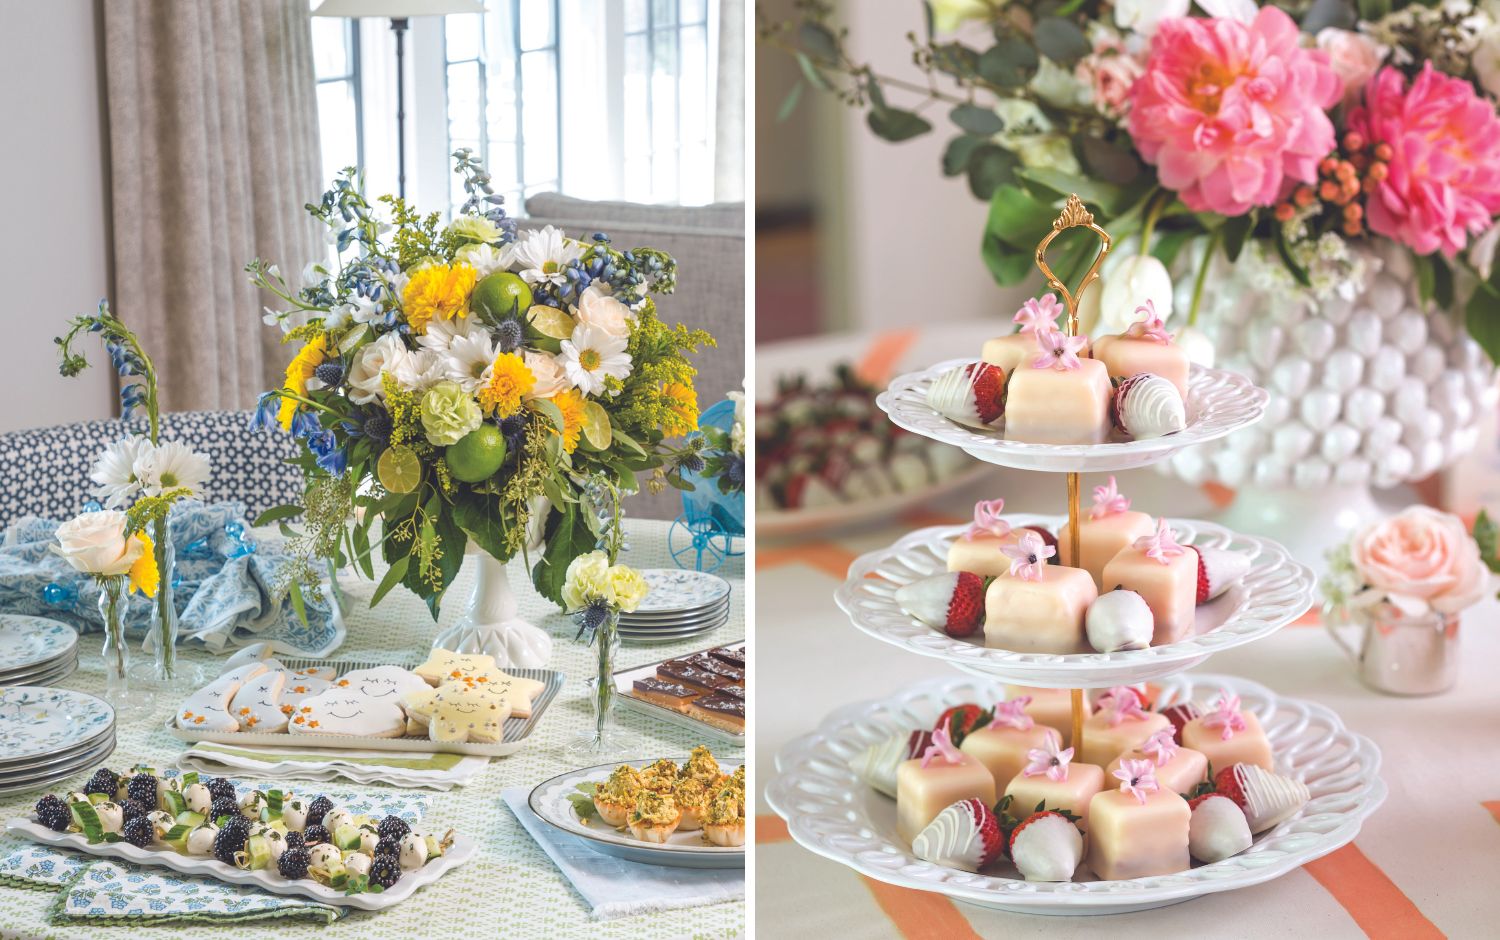 Easy Recipes and Charming Decor Ideas for Hosting a Baby Shower